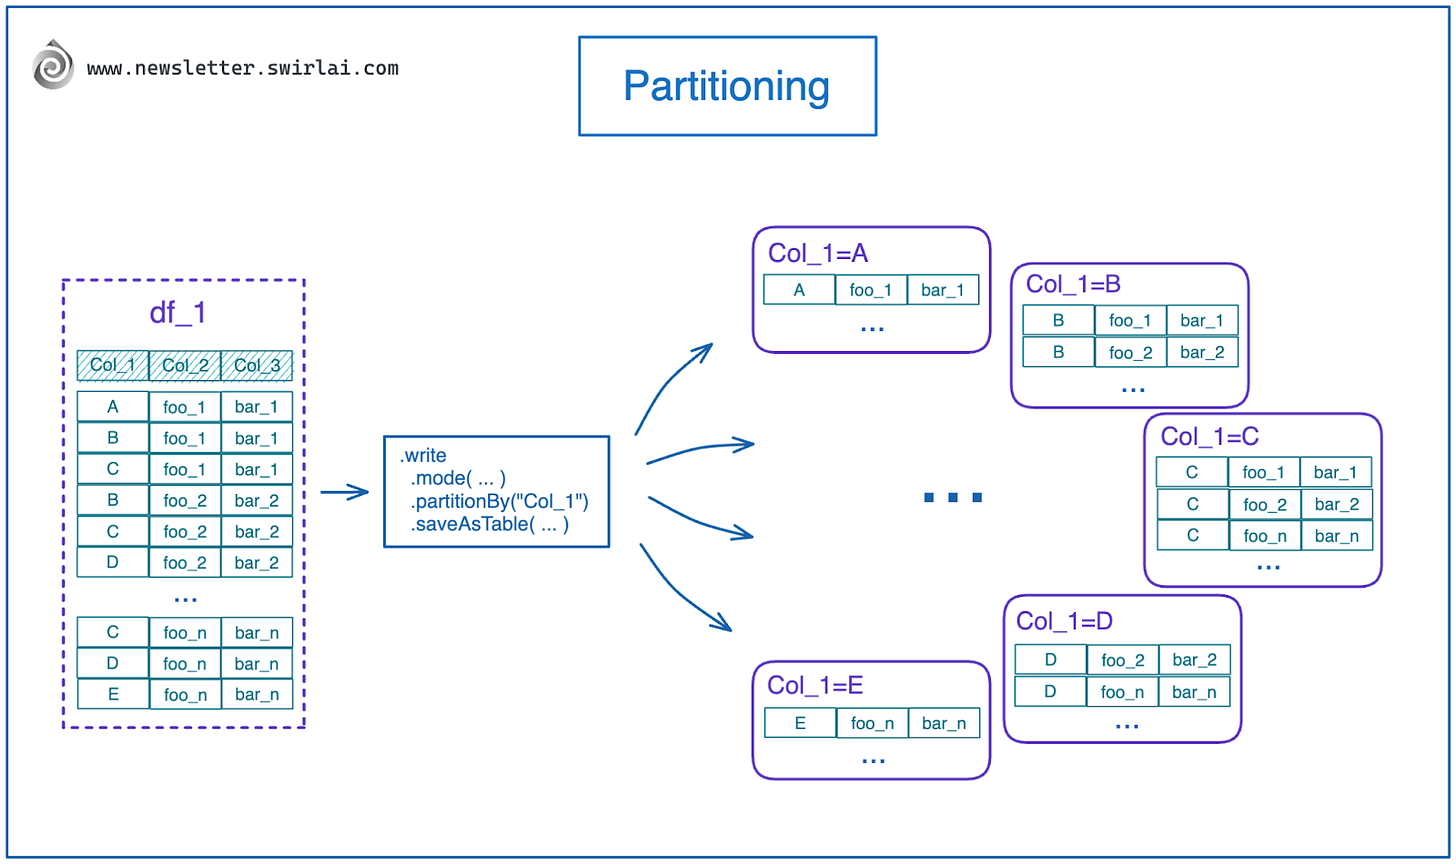 Partitioning in Apache Spark